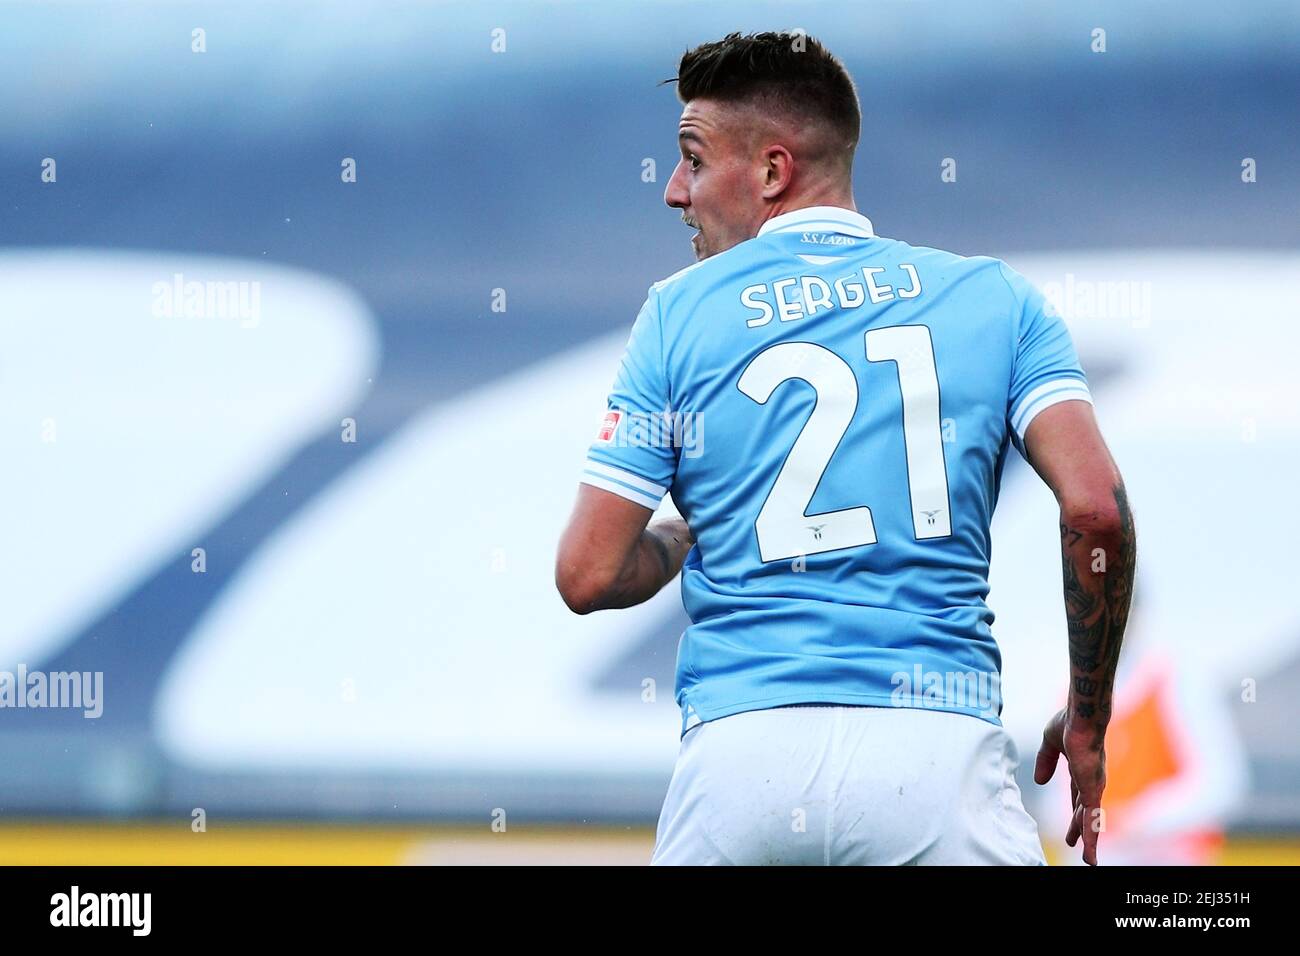 Sergej Milinkovic Savic of Lazio in action during the Italian championship  Serie A football match between SS Lazio and UC S / LM Stock Photo - Alamy